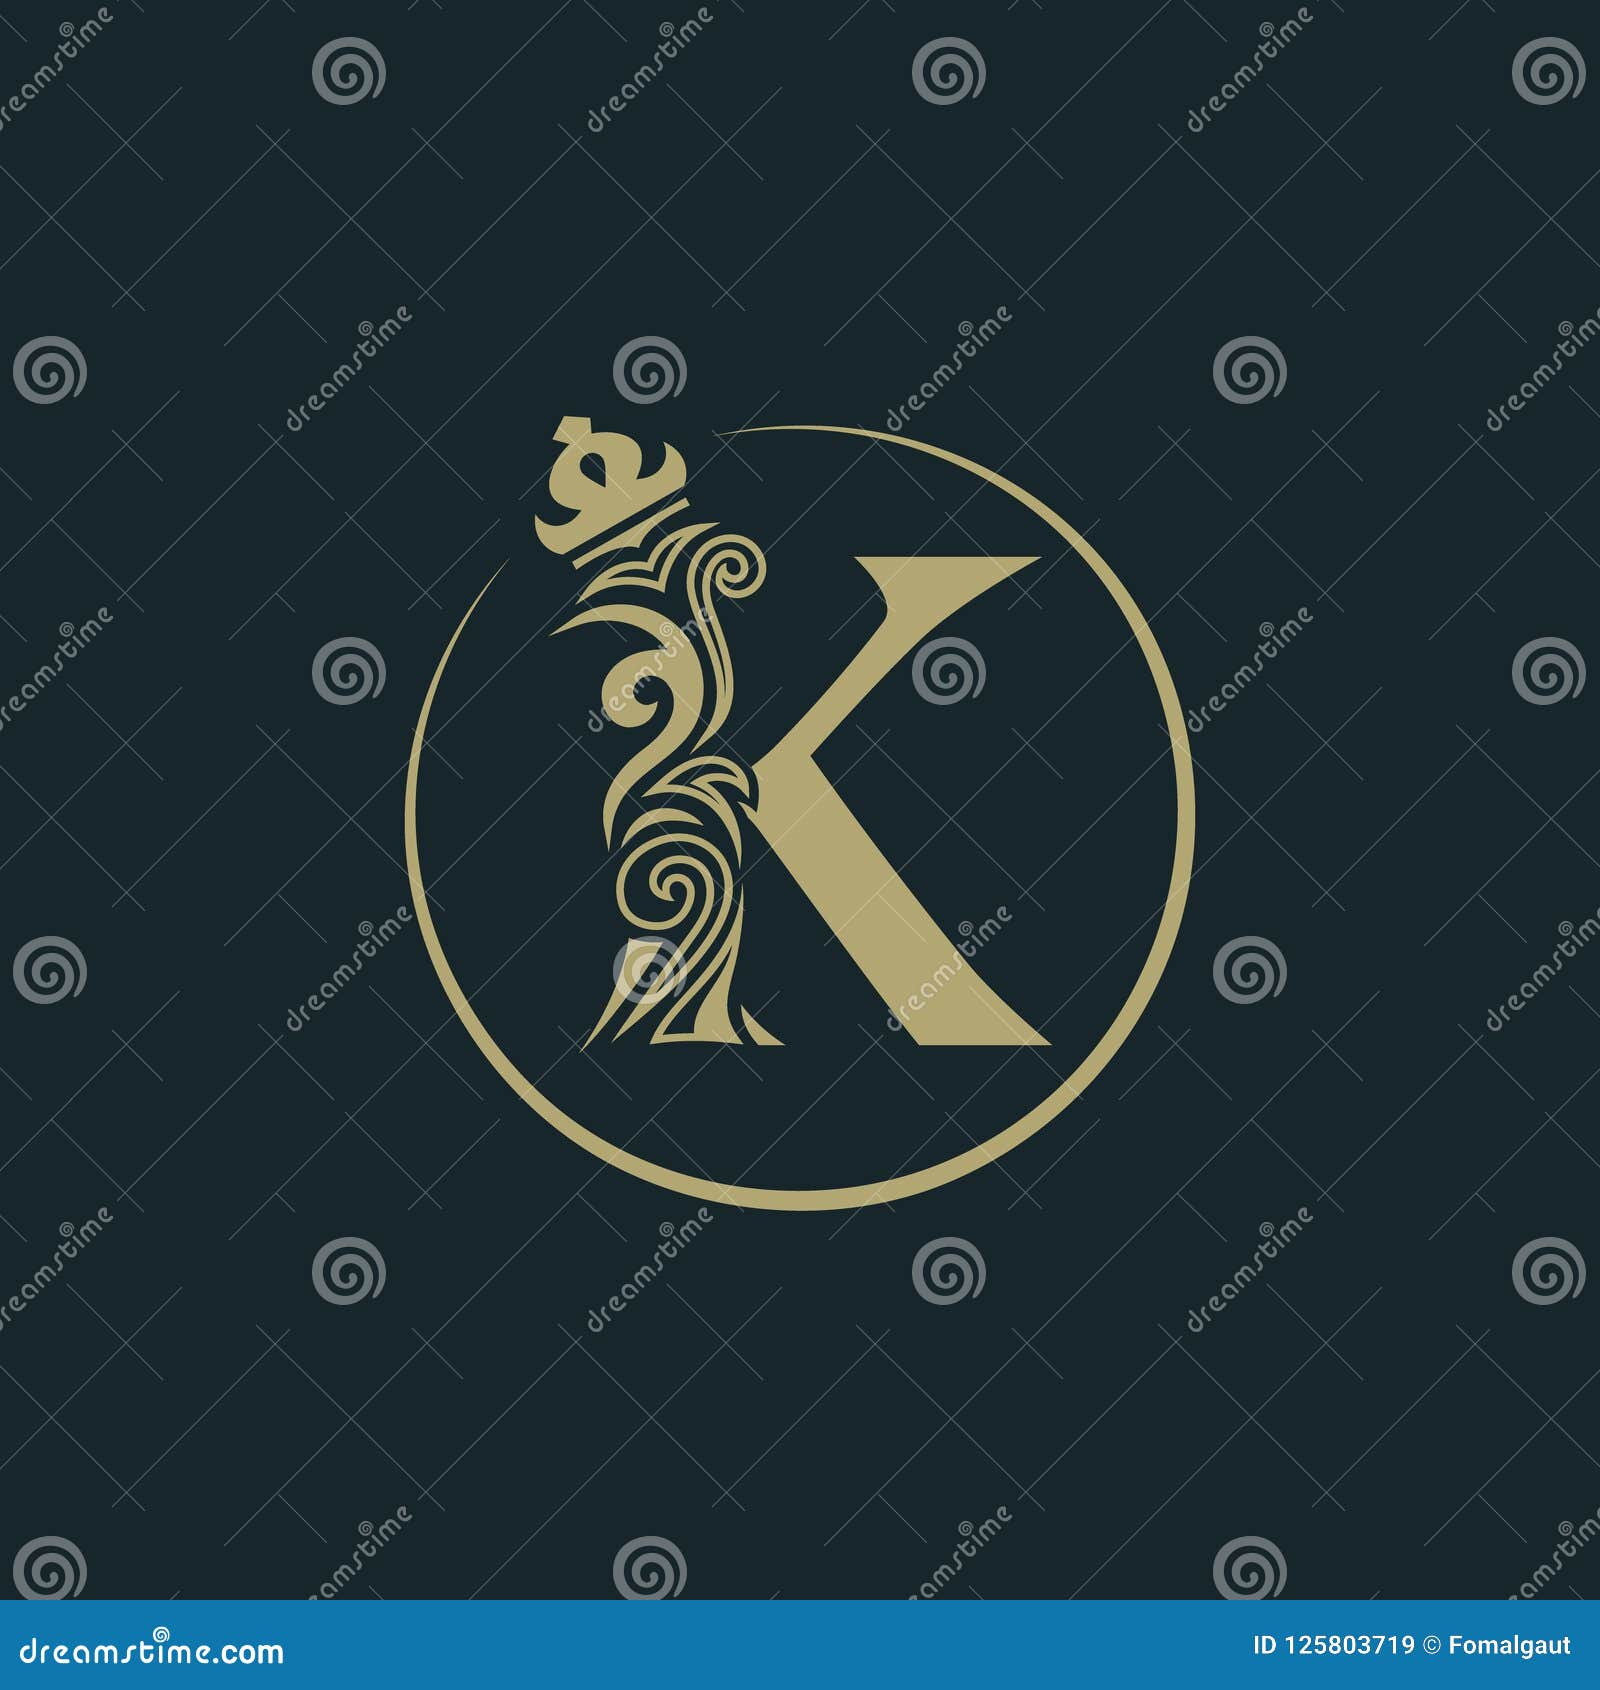 12+ Letter K With A Crown / Crown Laurel Wreath And The Monogram Letter